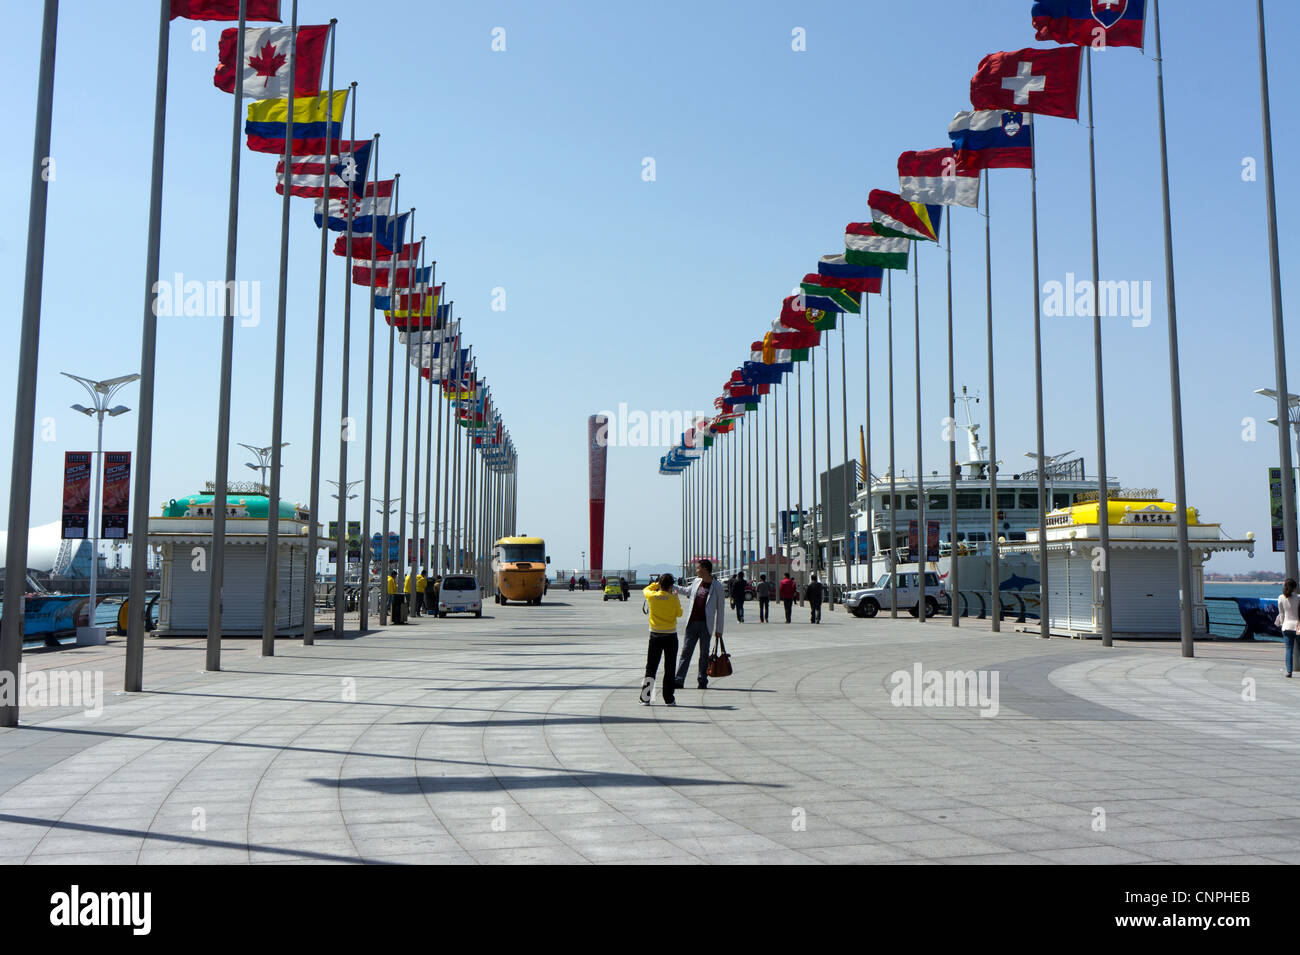 Flags of all nations at the Qingdao Olympic Sailing Centre, China Stock Photo